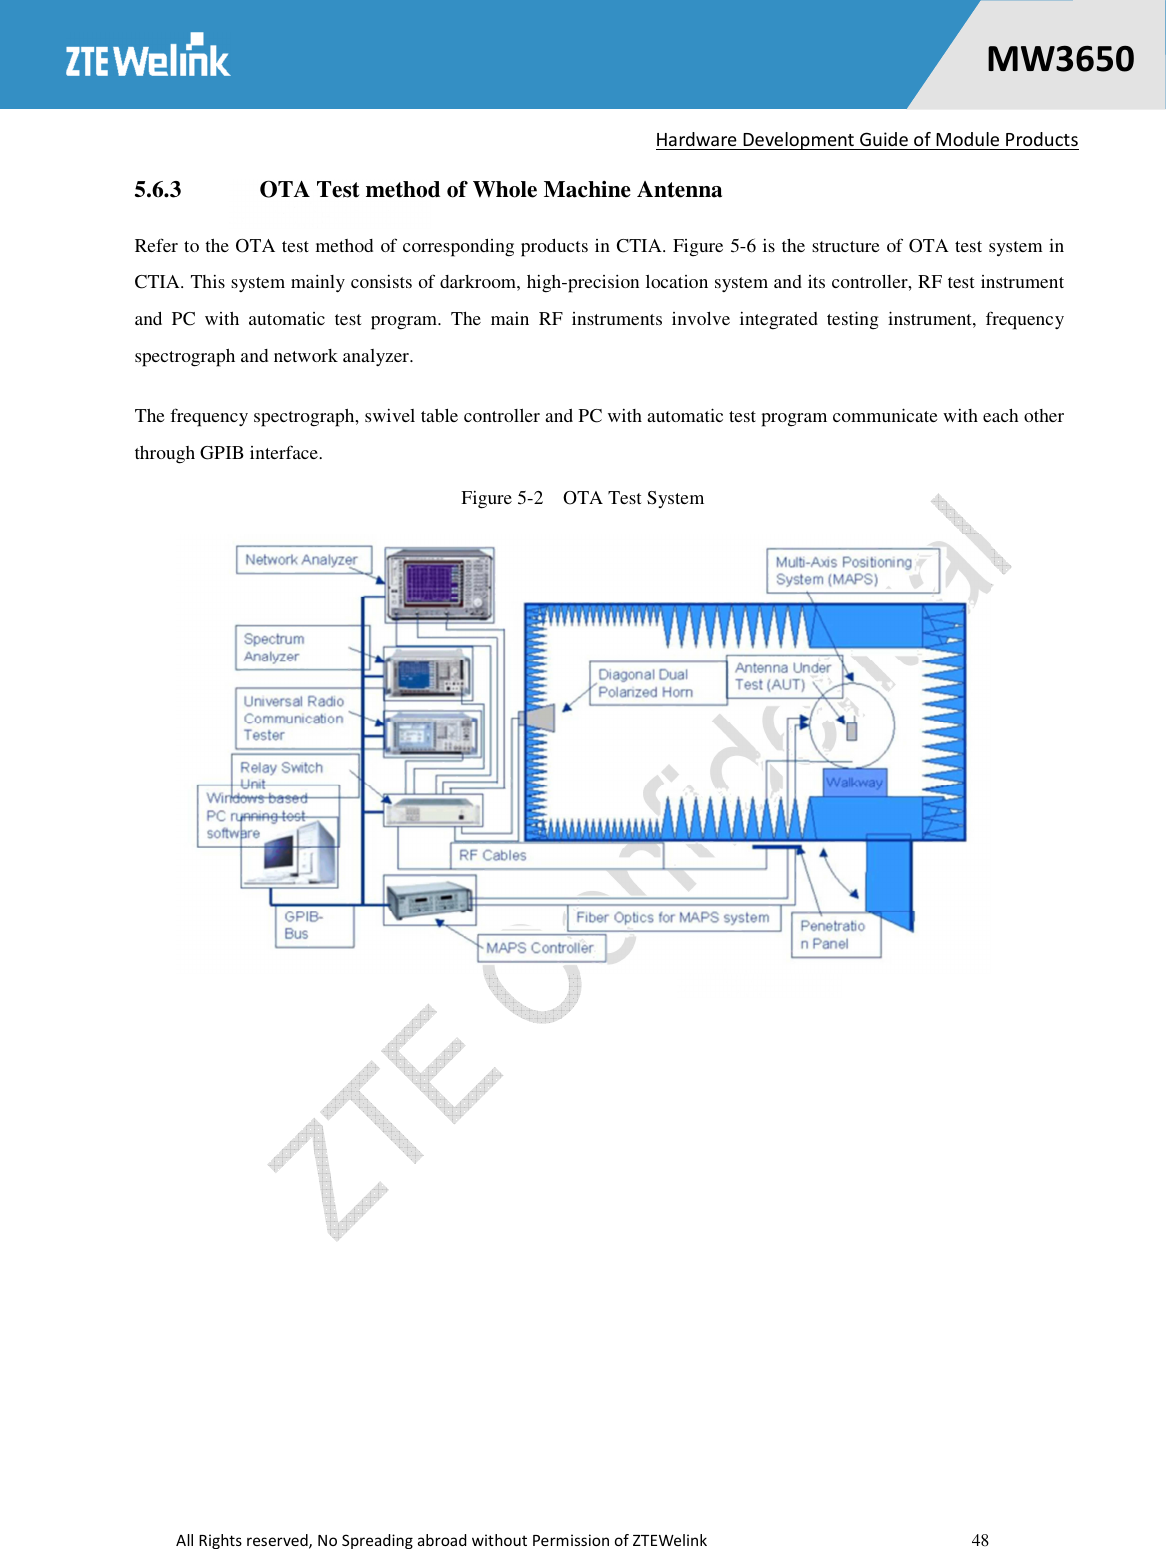   Hardware Development Guide of Module Products  All Rights reserved, No Spreading abroad without Permission of ZTEWelink    48    MW36500 5.6.3  OTA Test method of Whole Machine Antenna Refer to the OTA test method of corresponding products in CTIA. Figure 5-6 is the structure of OTA test system in CTIA. This system mainly consists of darkroom, high-precision location system and its controller, RF test instrument and  PC  with  automatic  test  program.  The  main  RF  instruments  involve  integrated  testing  instrument,  frequency spectrograph and network analyzer. The frequency spectrograph, swivel table controller and PC with automatic test program communicate with each other through GPIB interface. Figure 5-2    OTA Test System     